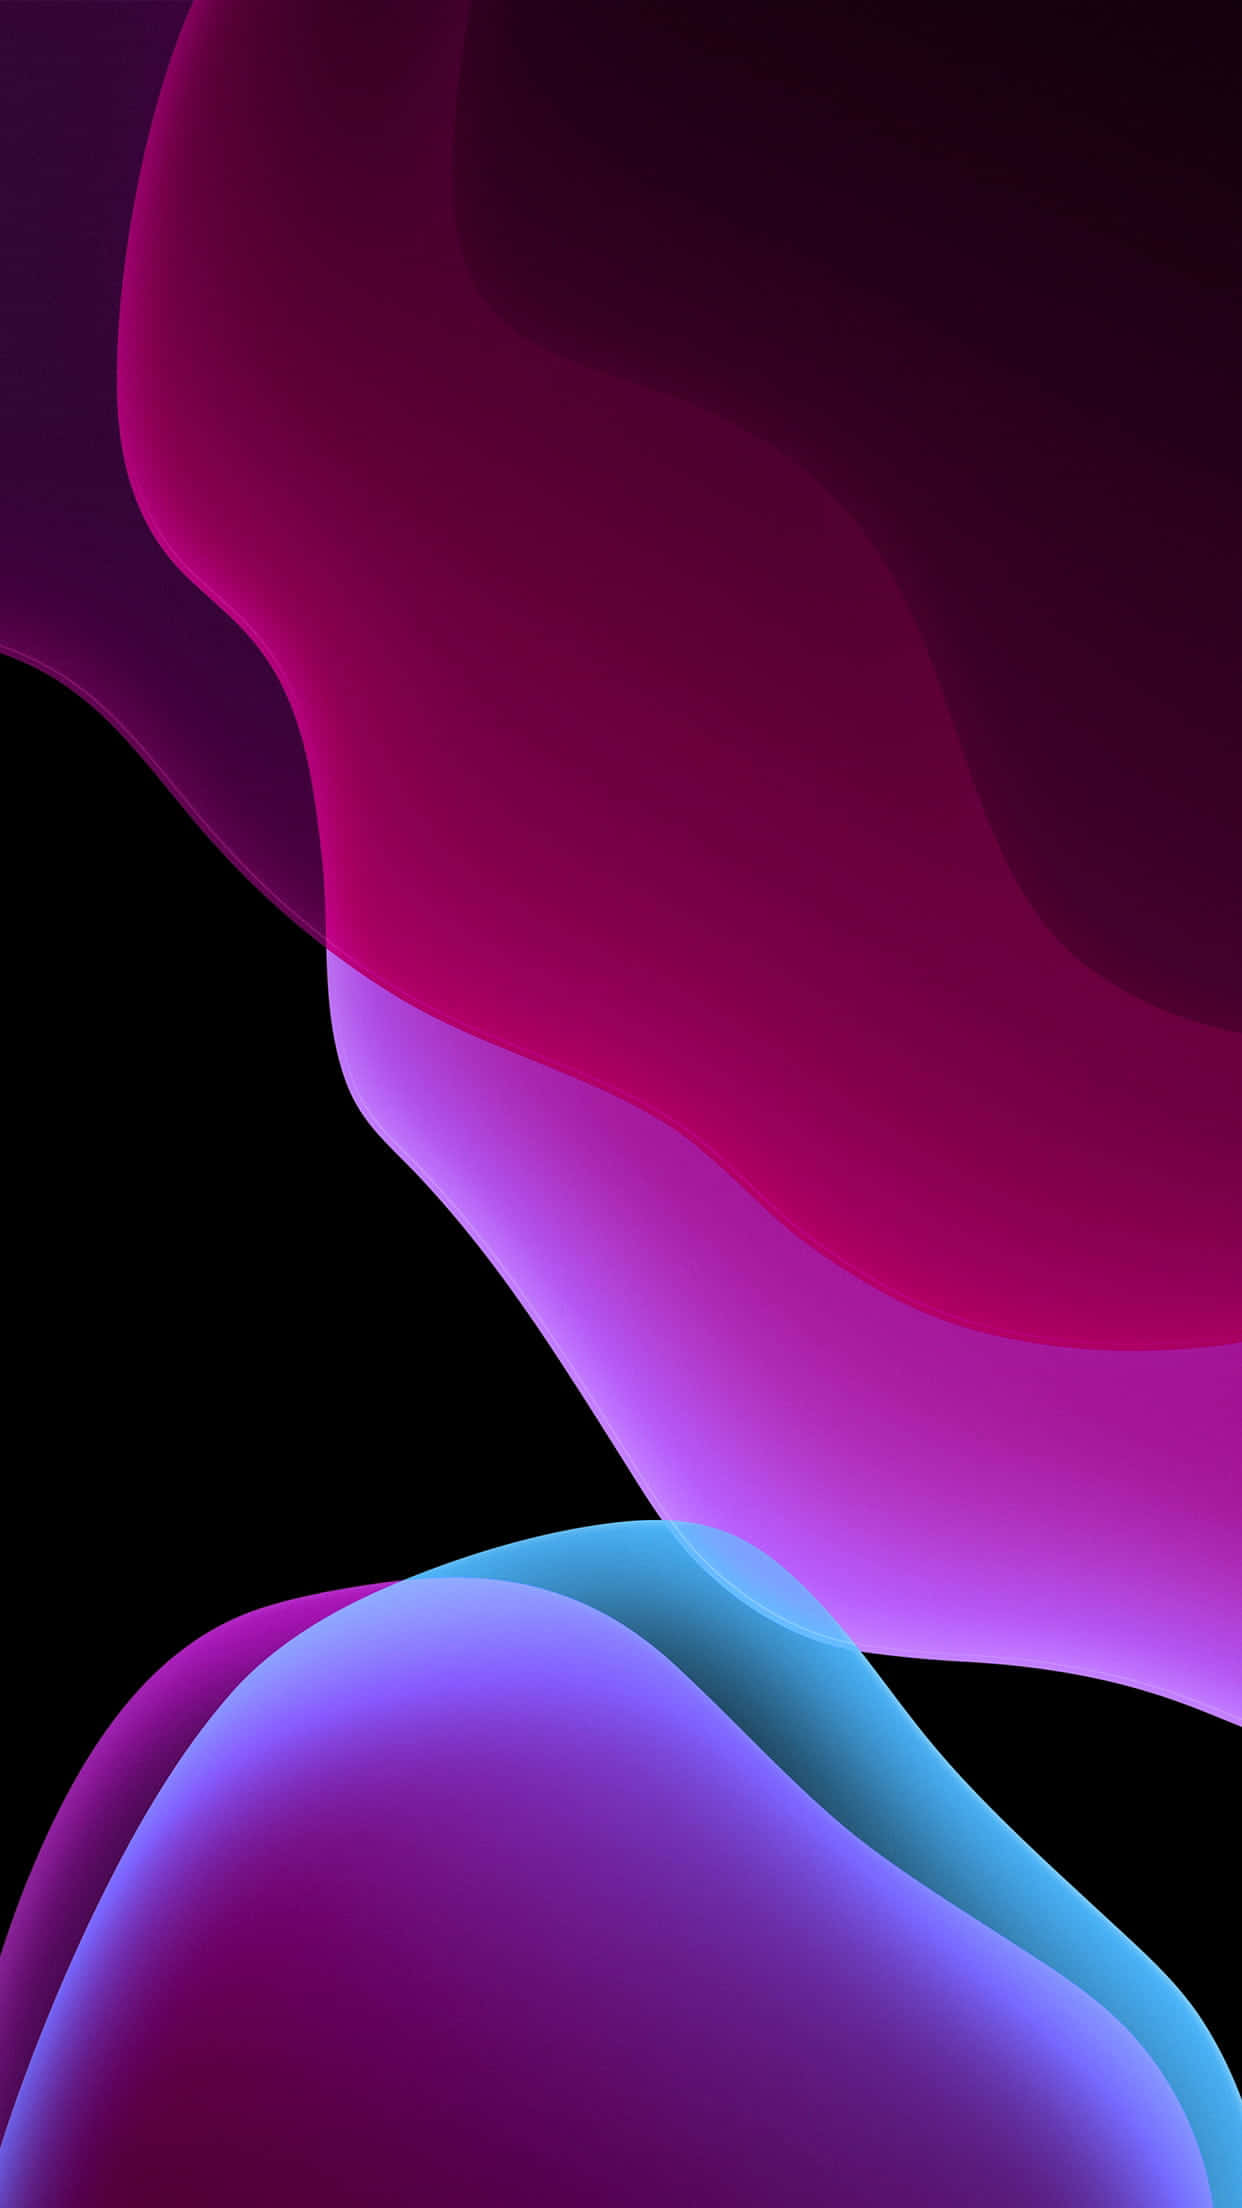 Download Ios 14 Background | Wallpapers.com